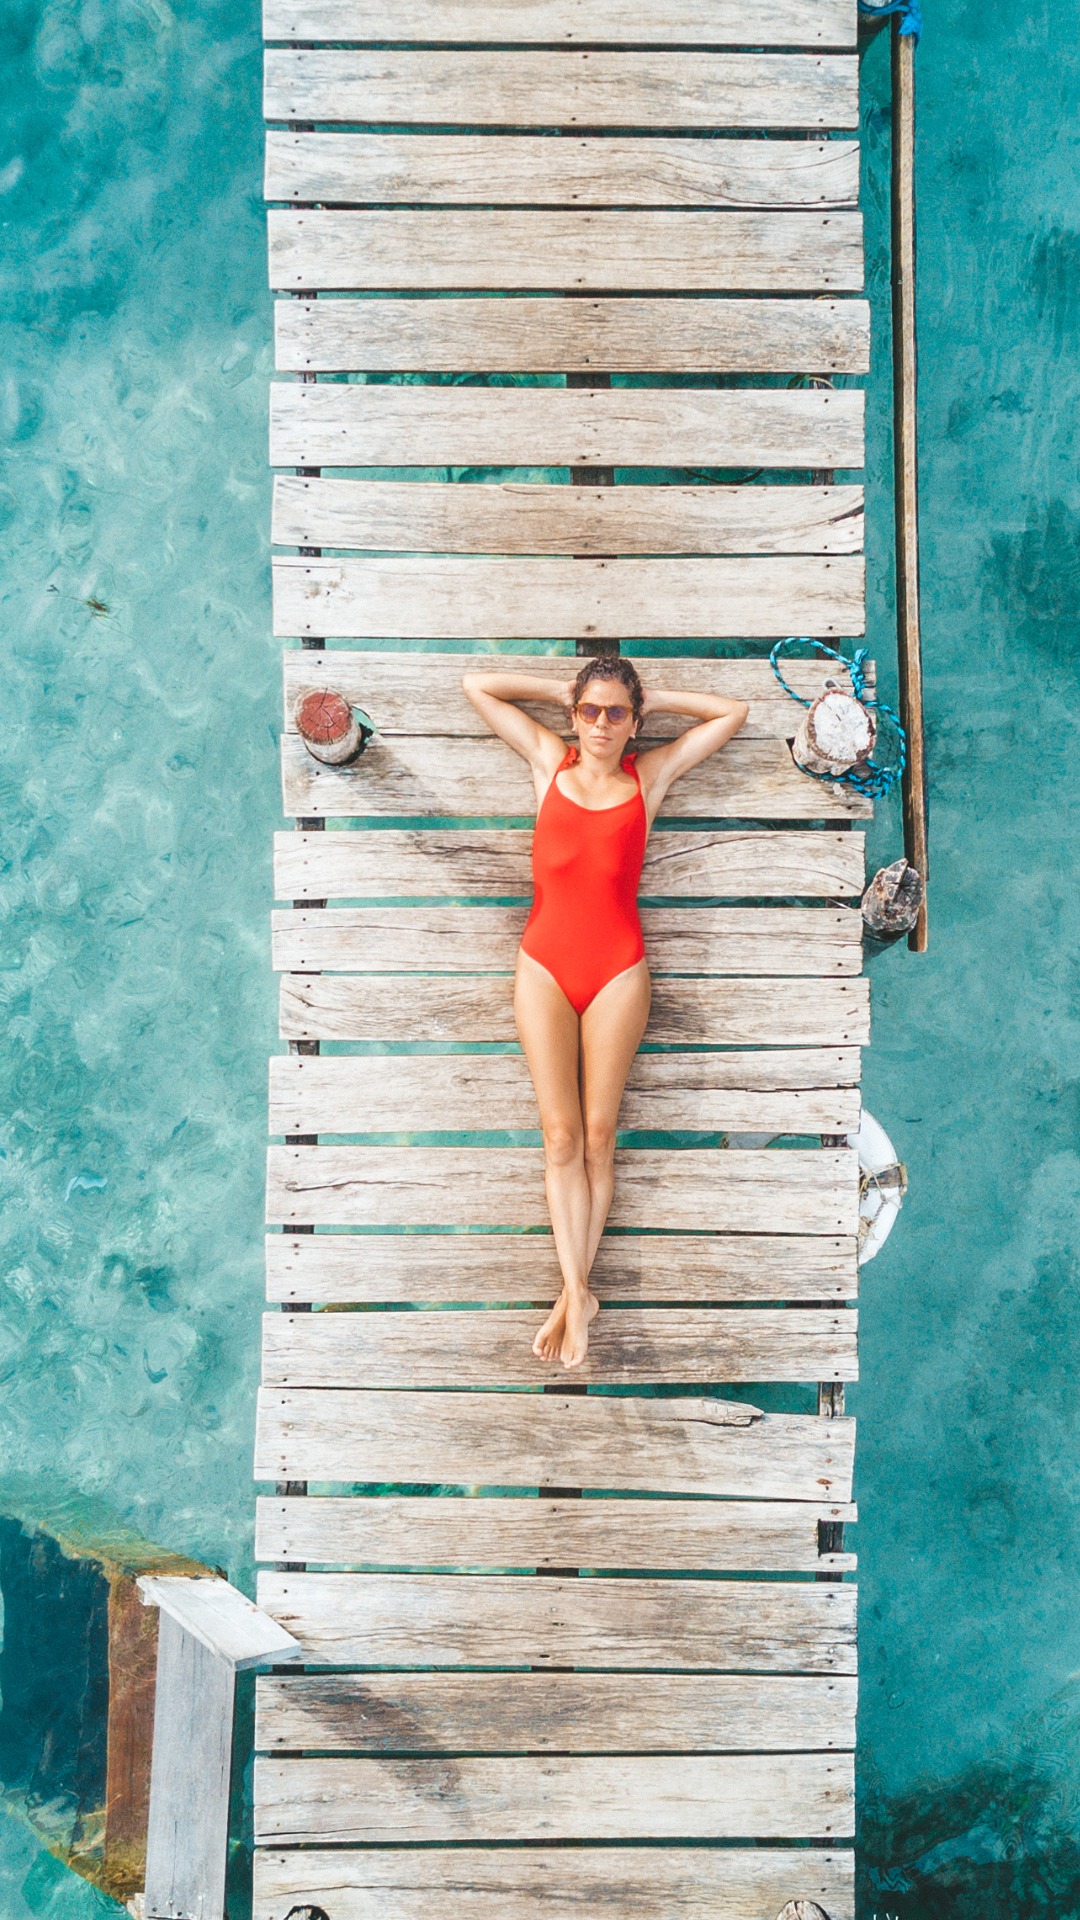 aerial shot of woman relaxing in a water bungalow picture id1034306790